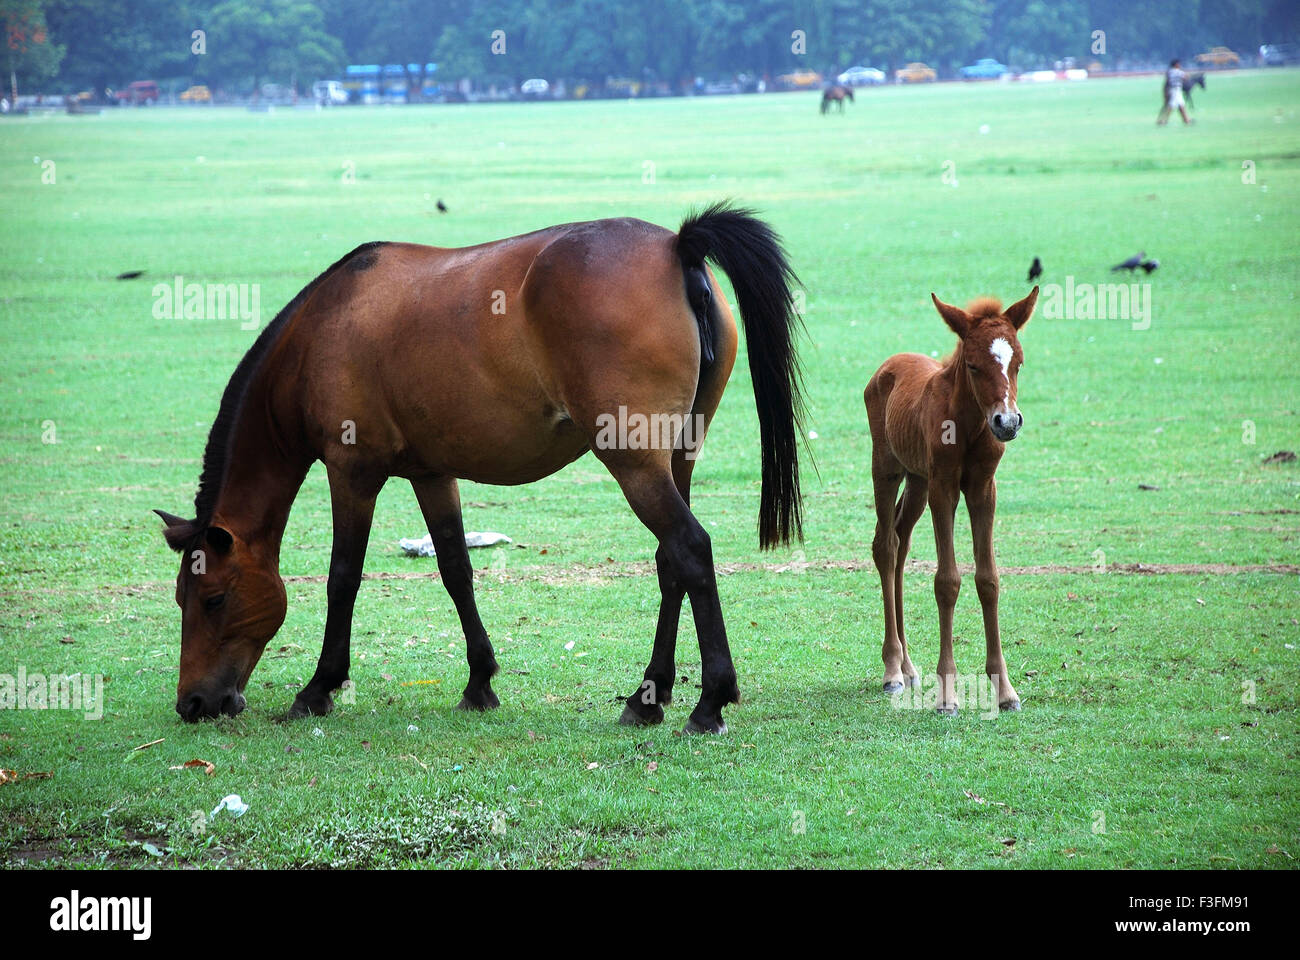 Horse and calf grazing Stock Photo